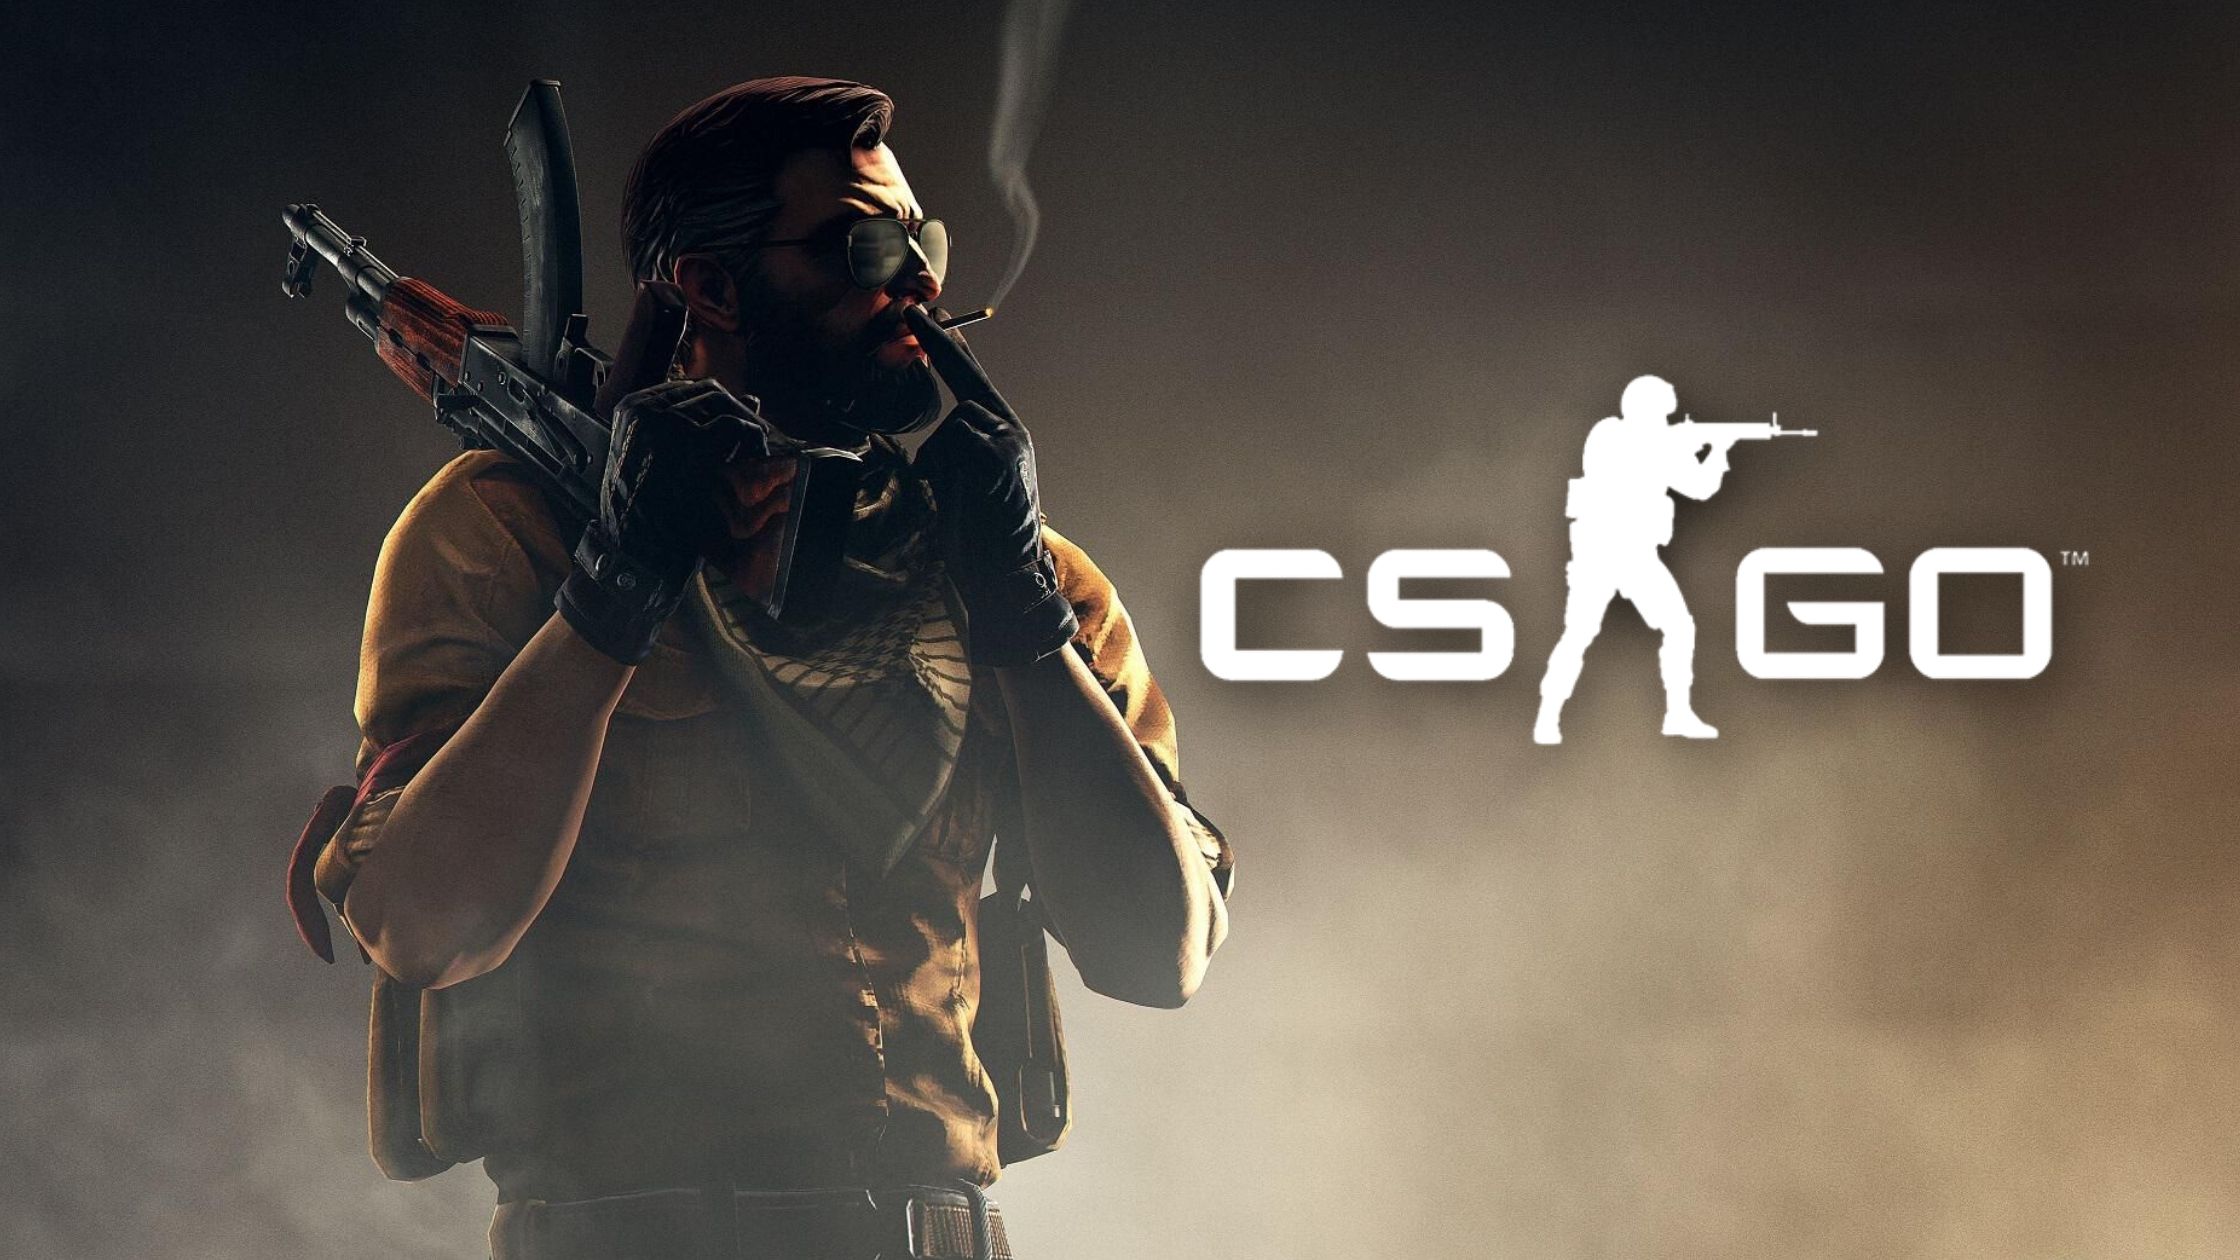 Counter-Strike 2 Coming This Summer as Free CS:GO Upgrade - CNET